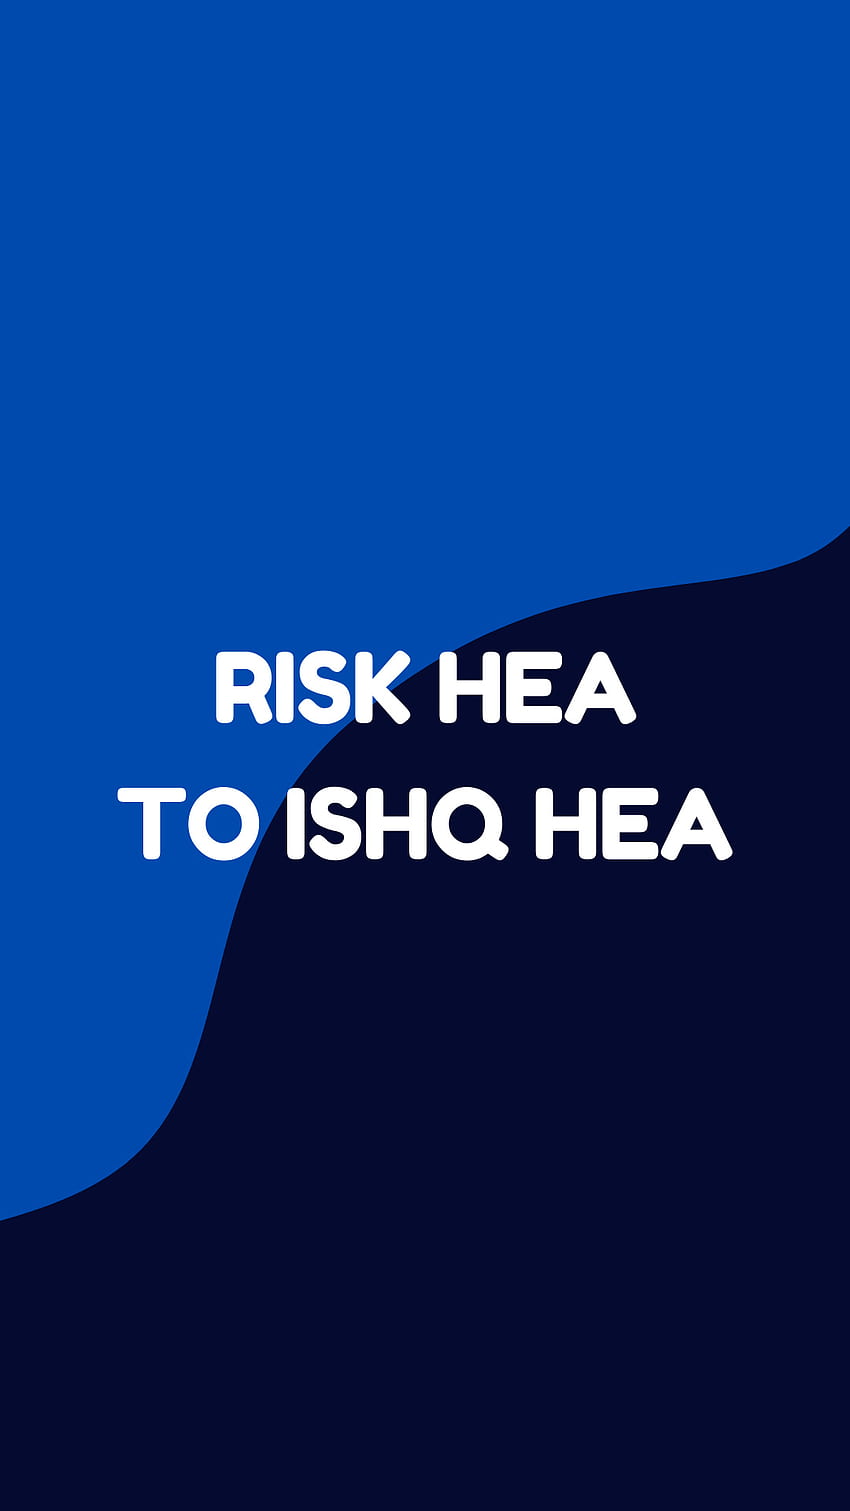 Risk hea to ishq hea, scam risk, risk he to ishq he, risk hea, scam, scam 1992, scam HD phone wallpaper